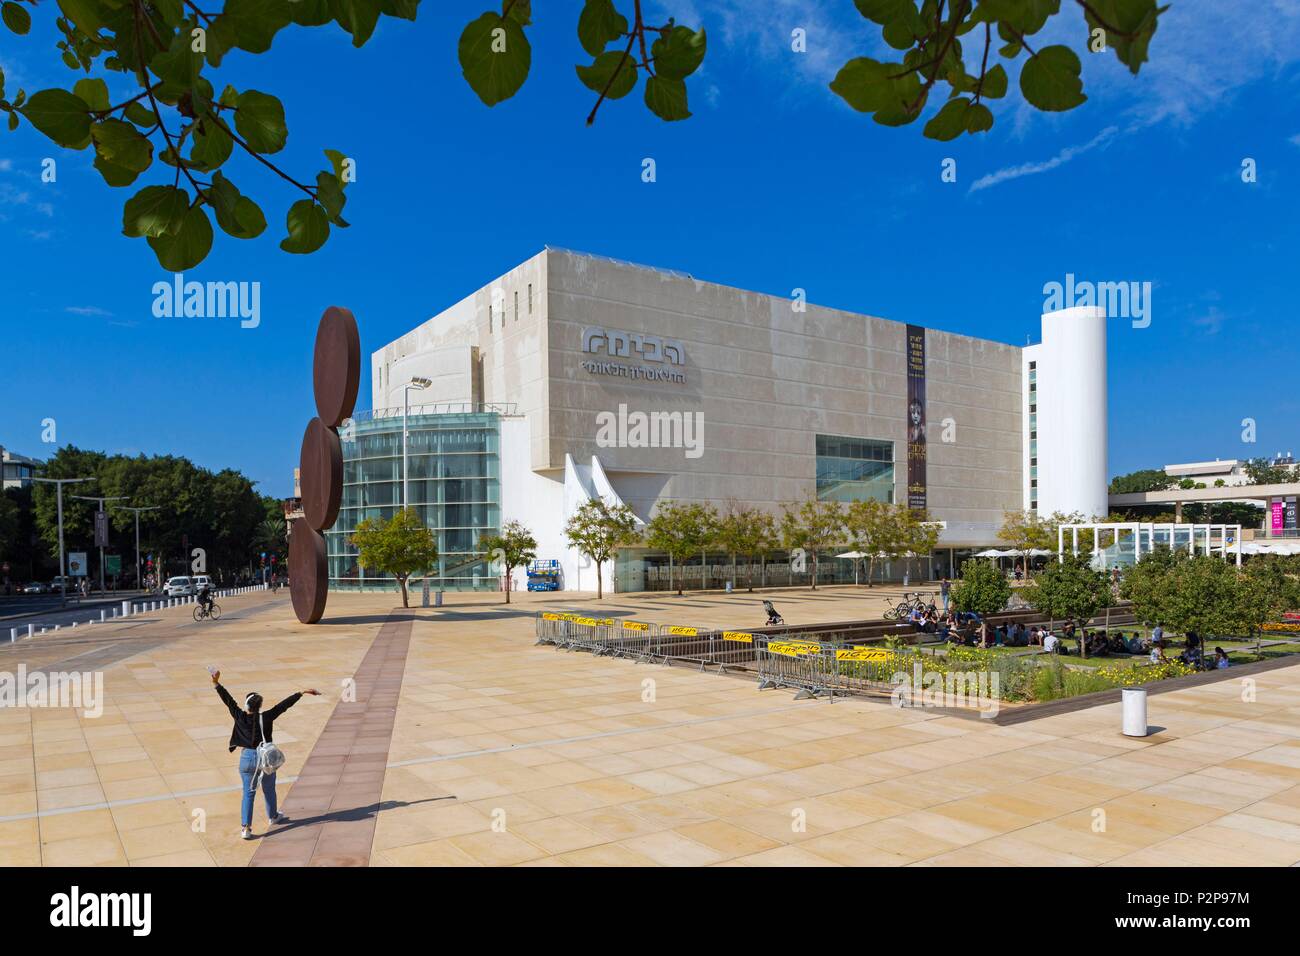 Israel, Tel Aviv-Jaffa, Tel-Aviv, the city center, Habima Square and the Habima Theater, the national theater of Israel, an expression of the spirit of the Jewish people with a particular focus on Hebrew culture and language Stock Photo